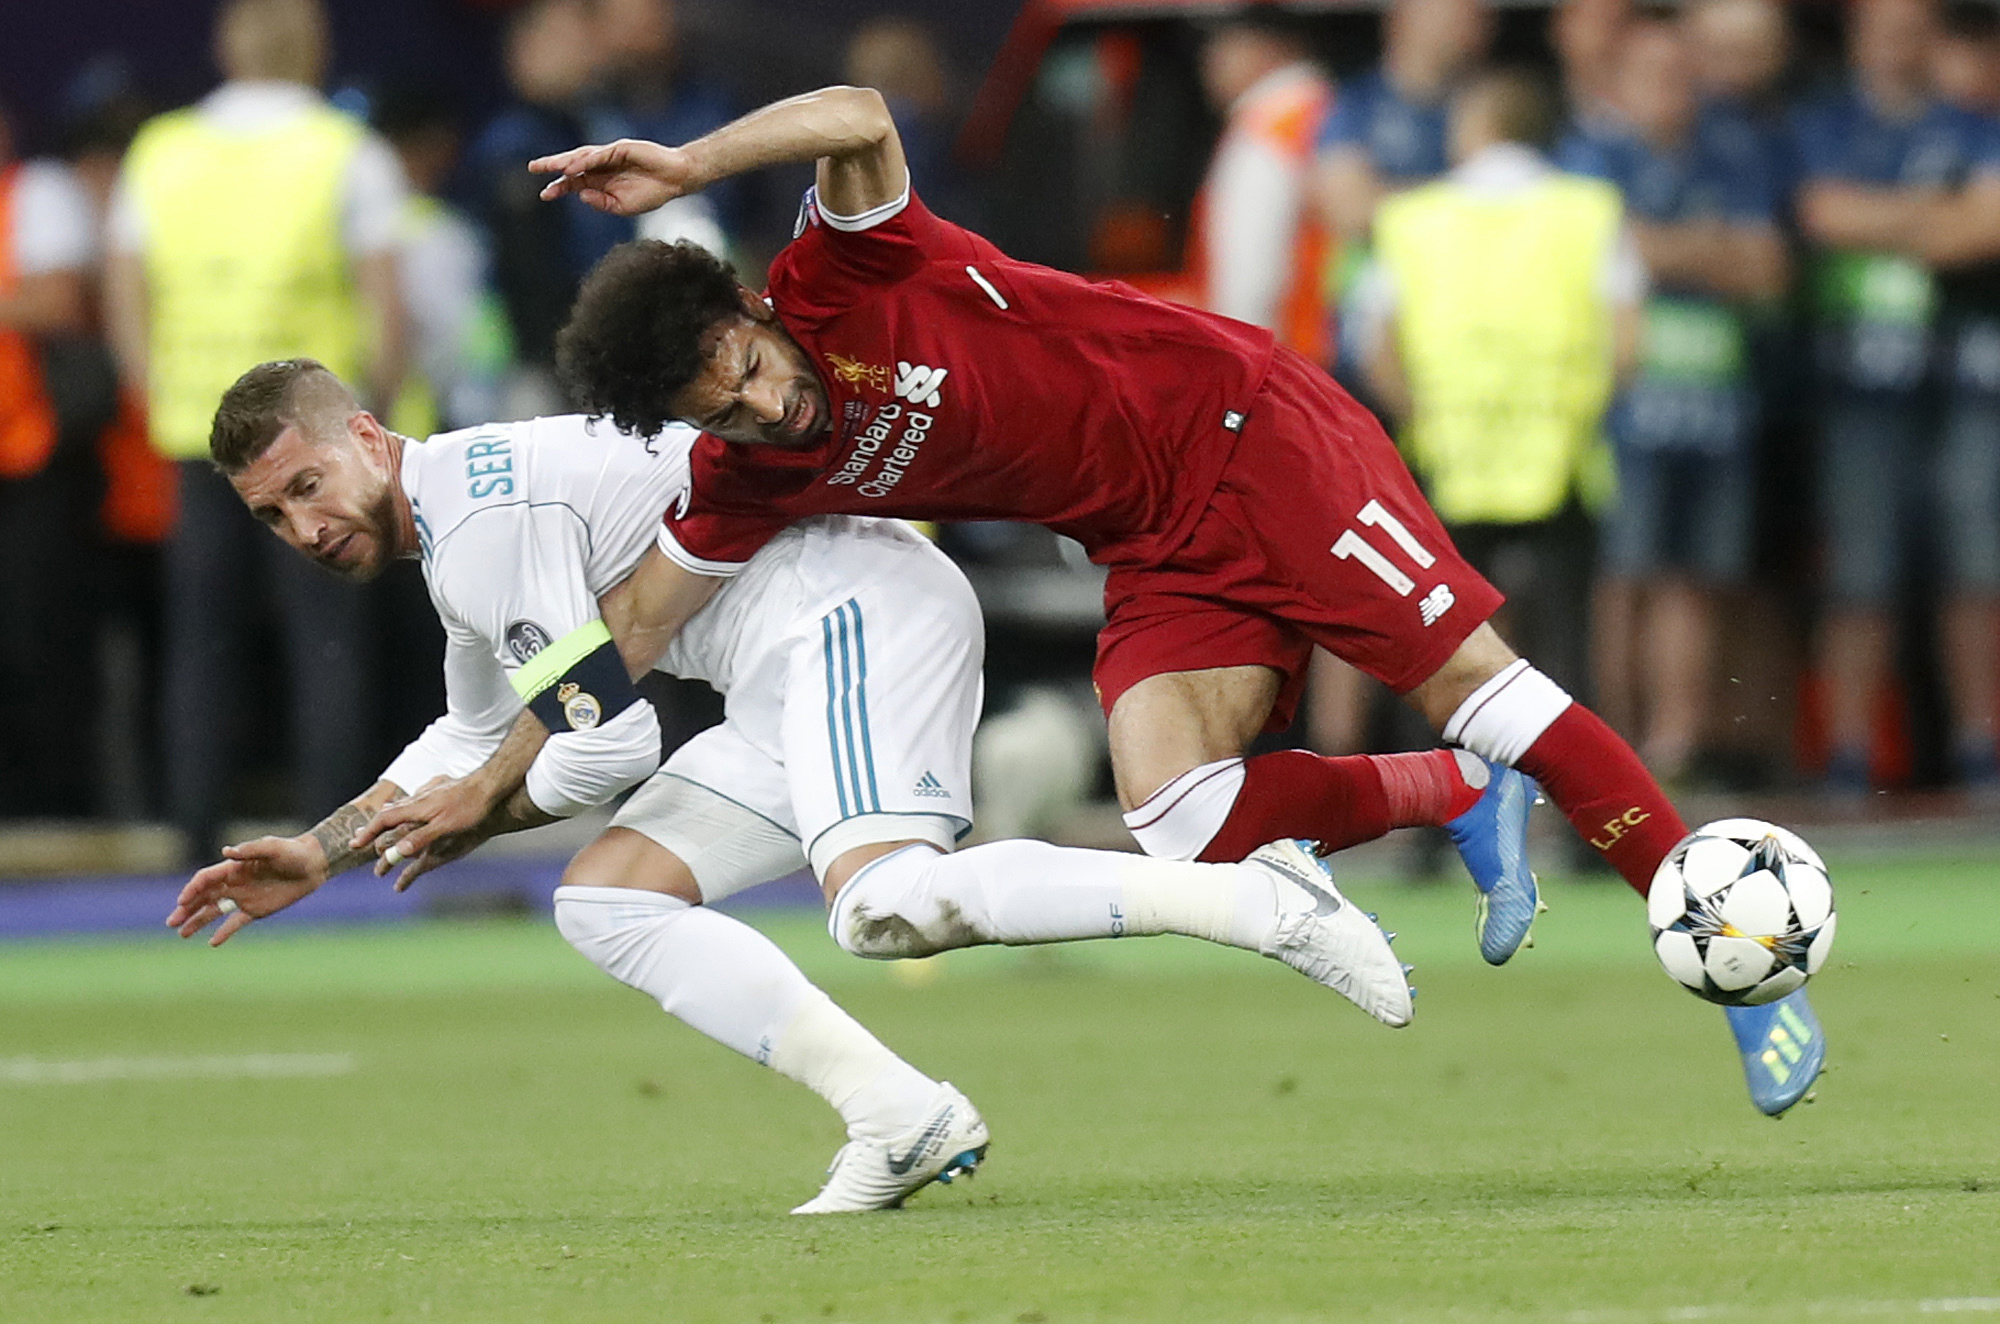 Sergio Ramos and Mohamed Salah in 2018 Champions League final